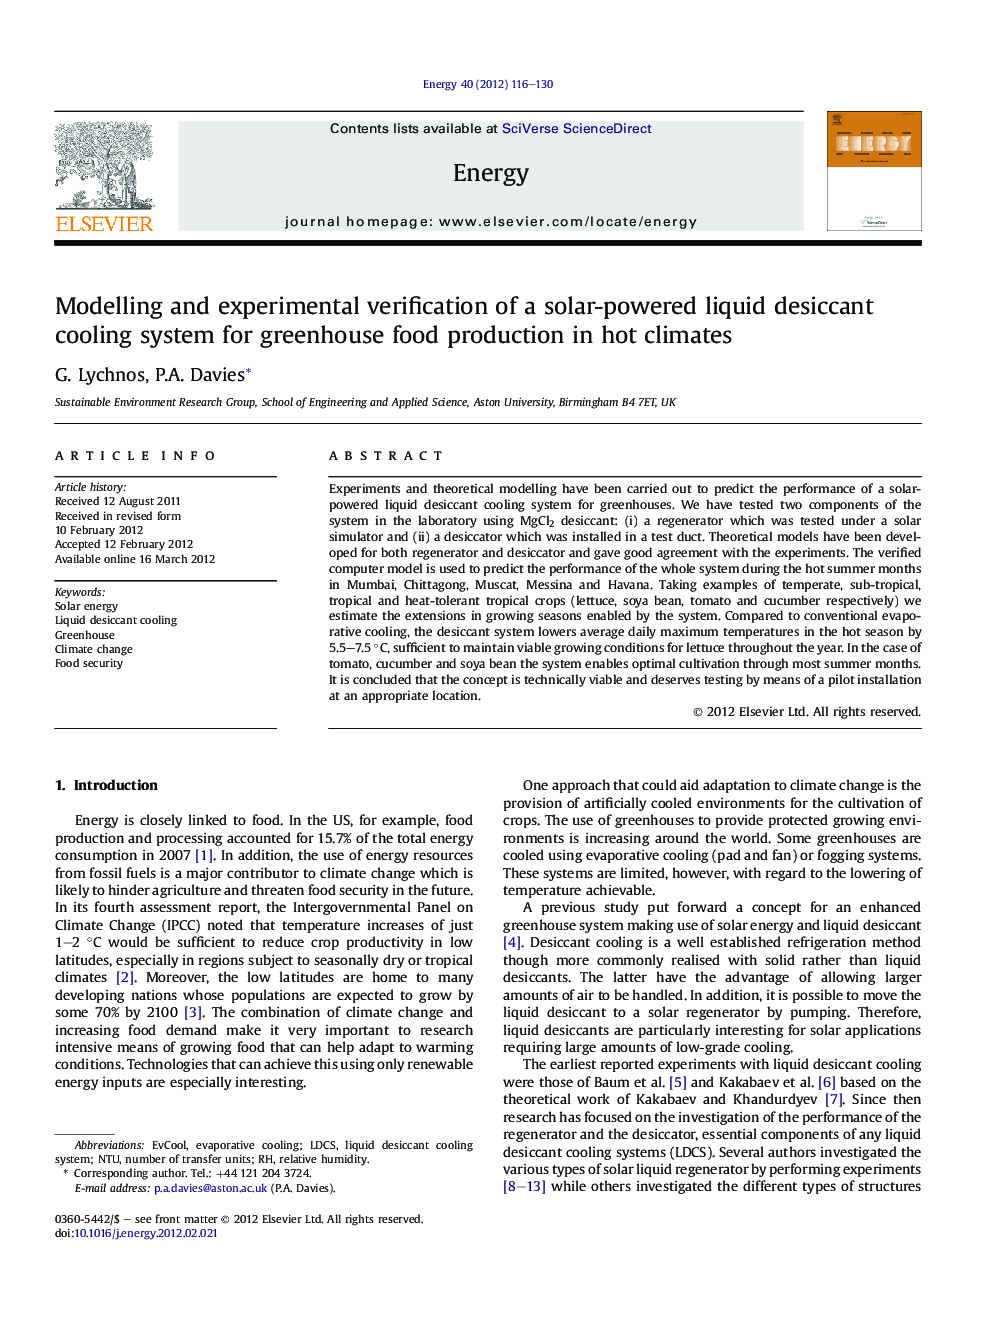 Modelling and experimental verification of a solar-powered liquid desiccant cooling system for greenhouse food production in hot climates